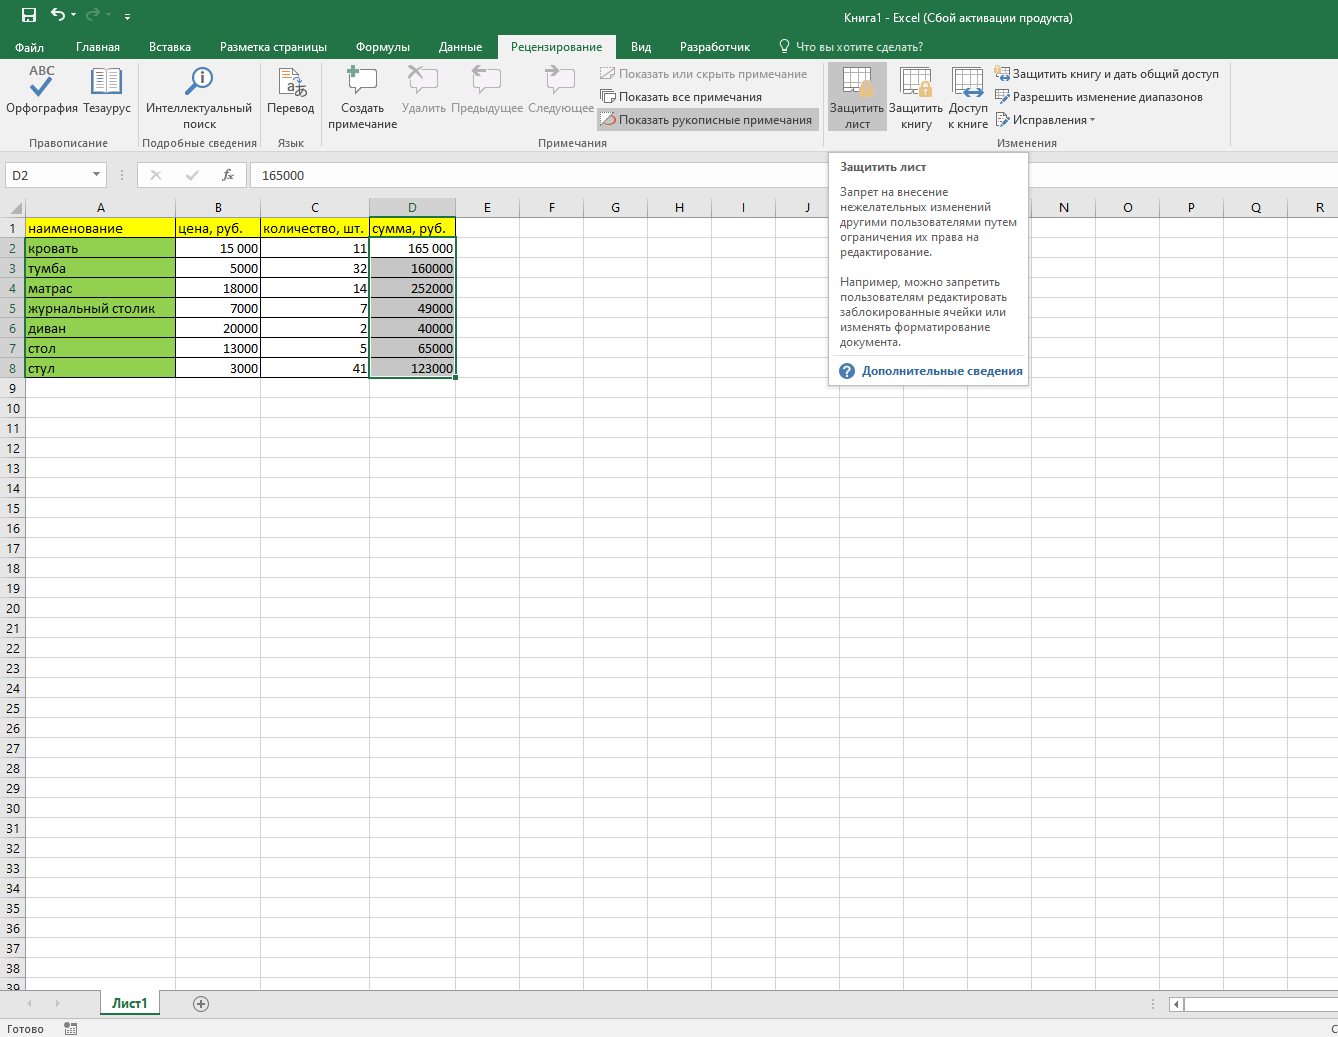 How to protect cells from changes in Excel